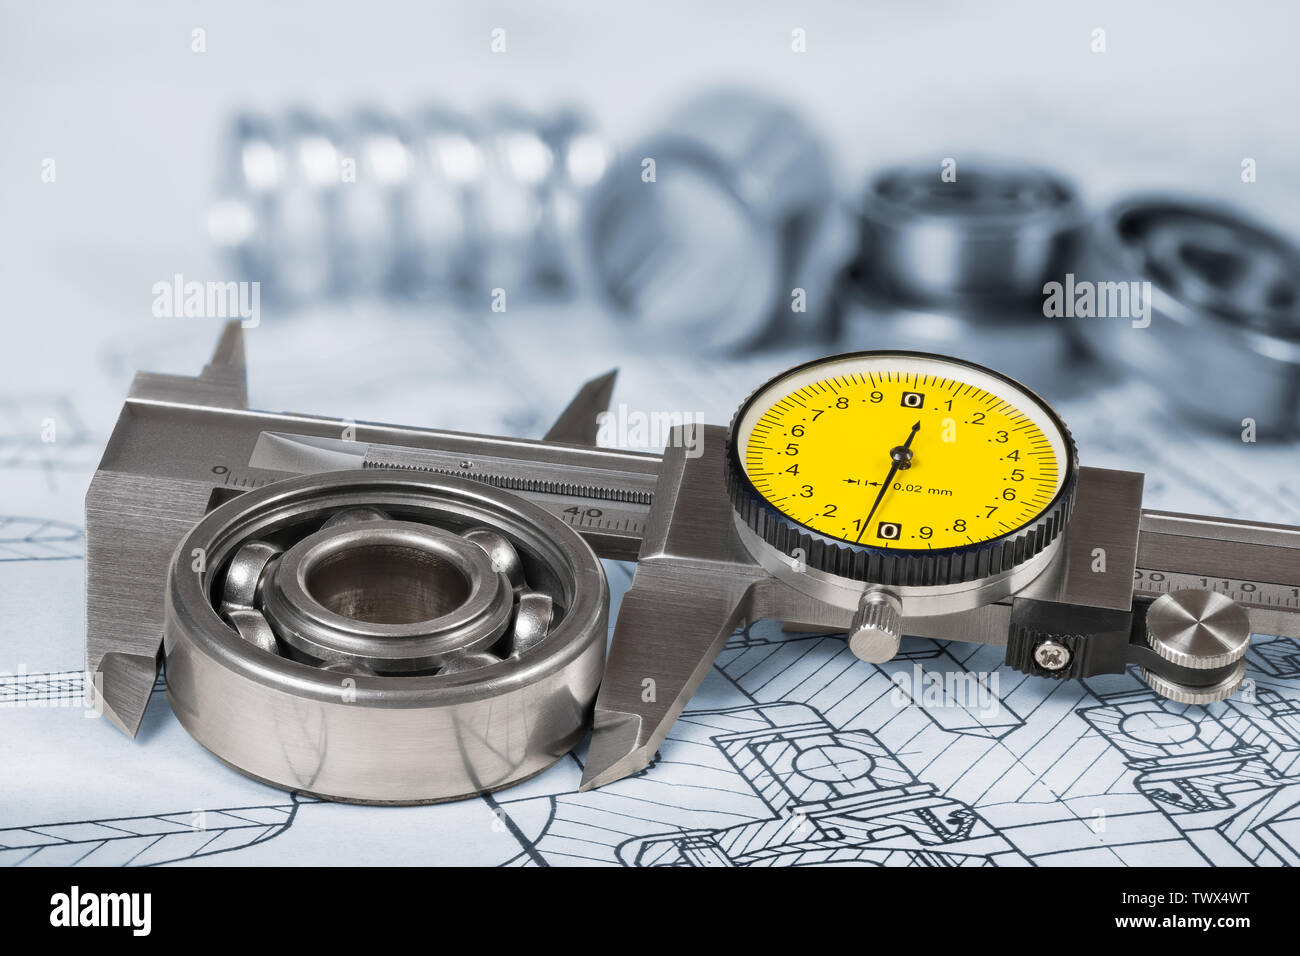 Ball bearing diameter measurement. Caliper gauge on technical drawing. Accurate measuring tool. Vernier scale, yellow round dial, group of steel parts. Stock Photo